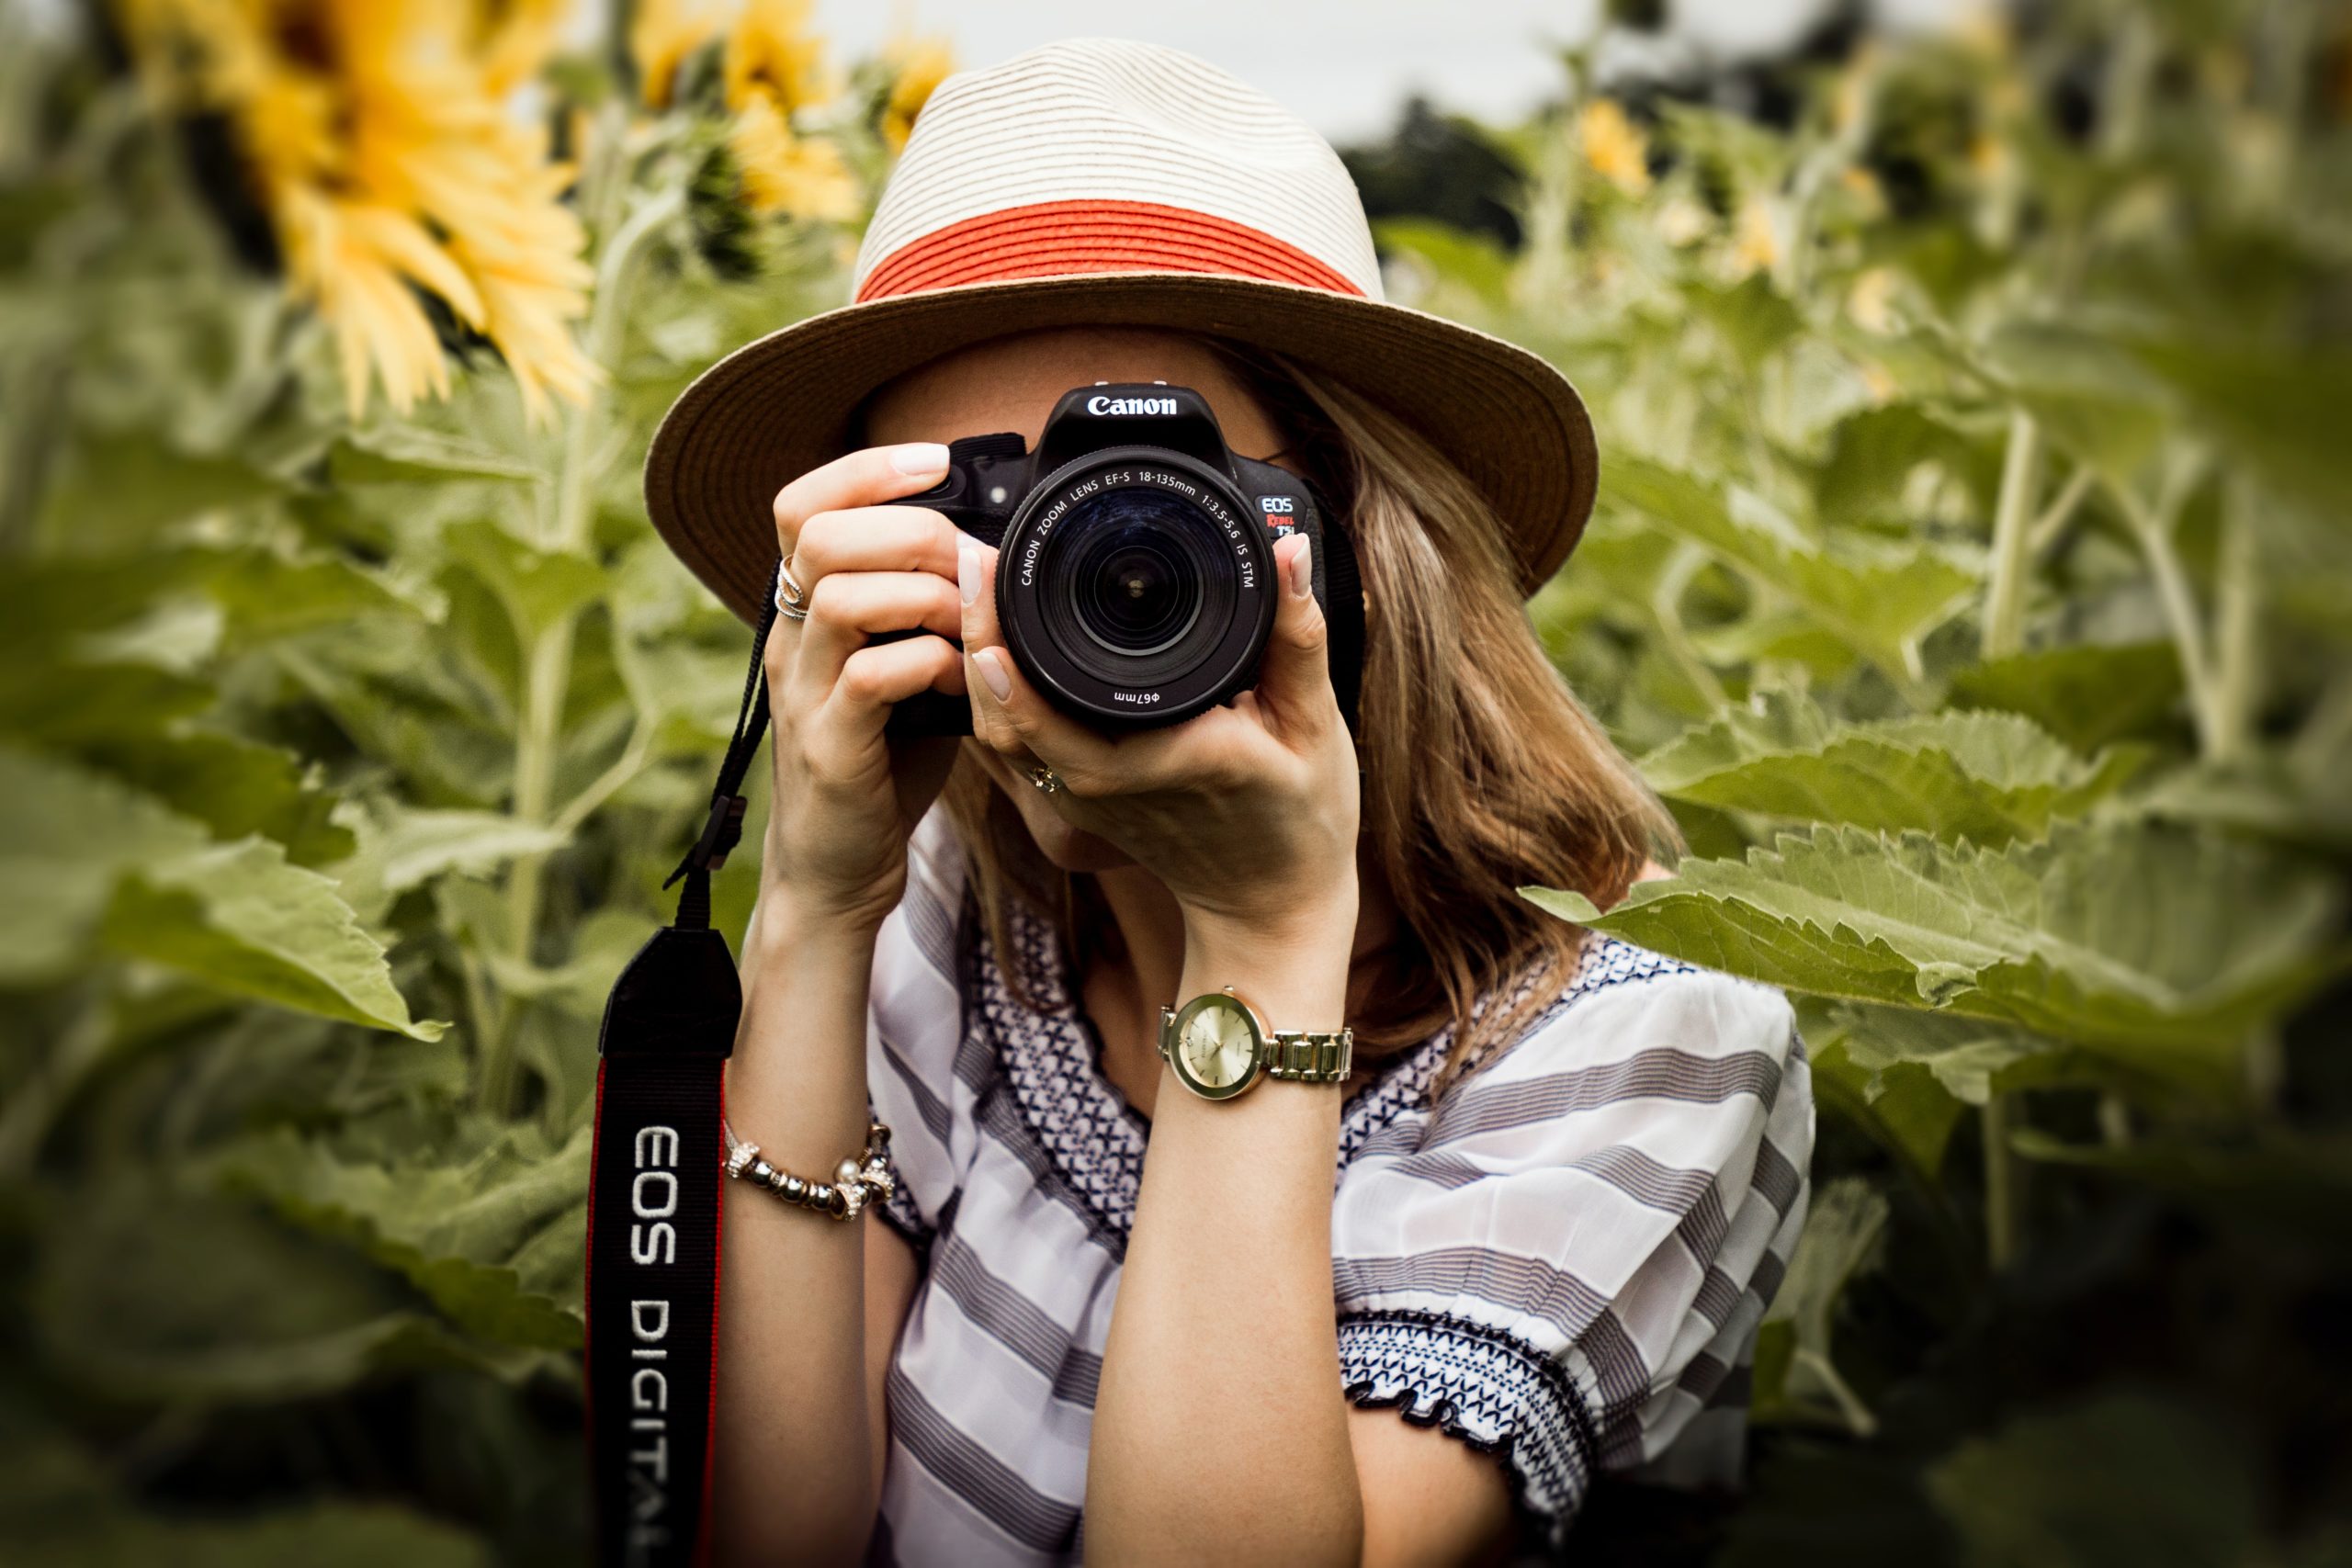 Person standing outside among bushes taking photo with their Canon camera